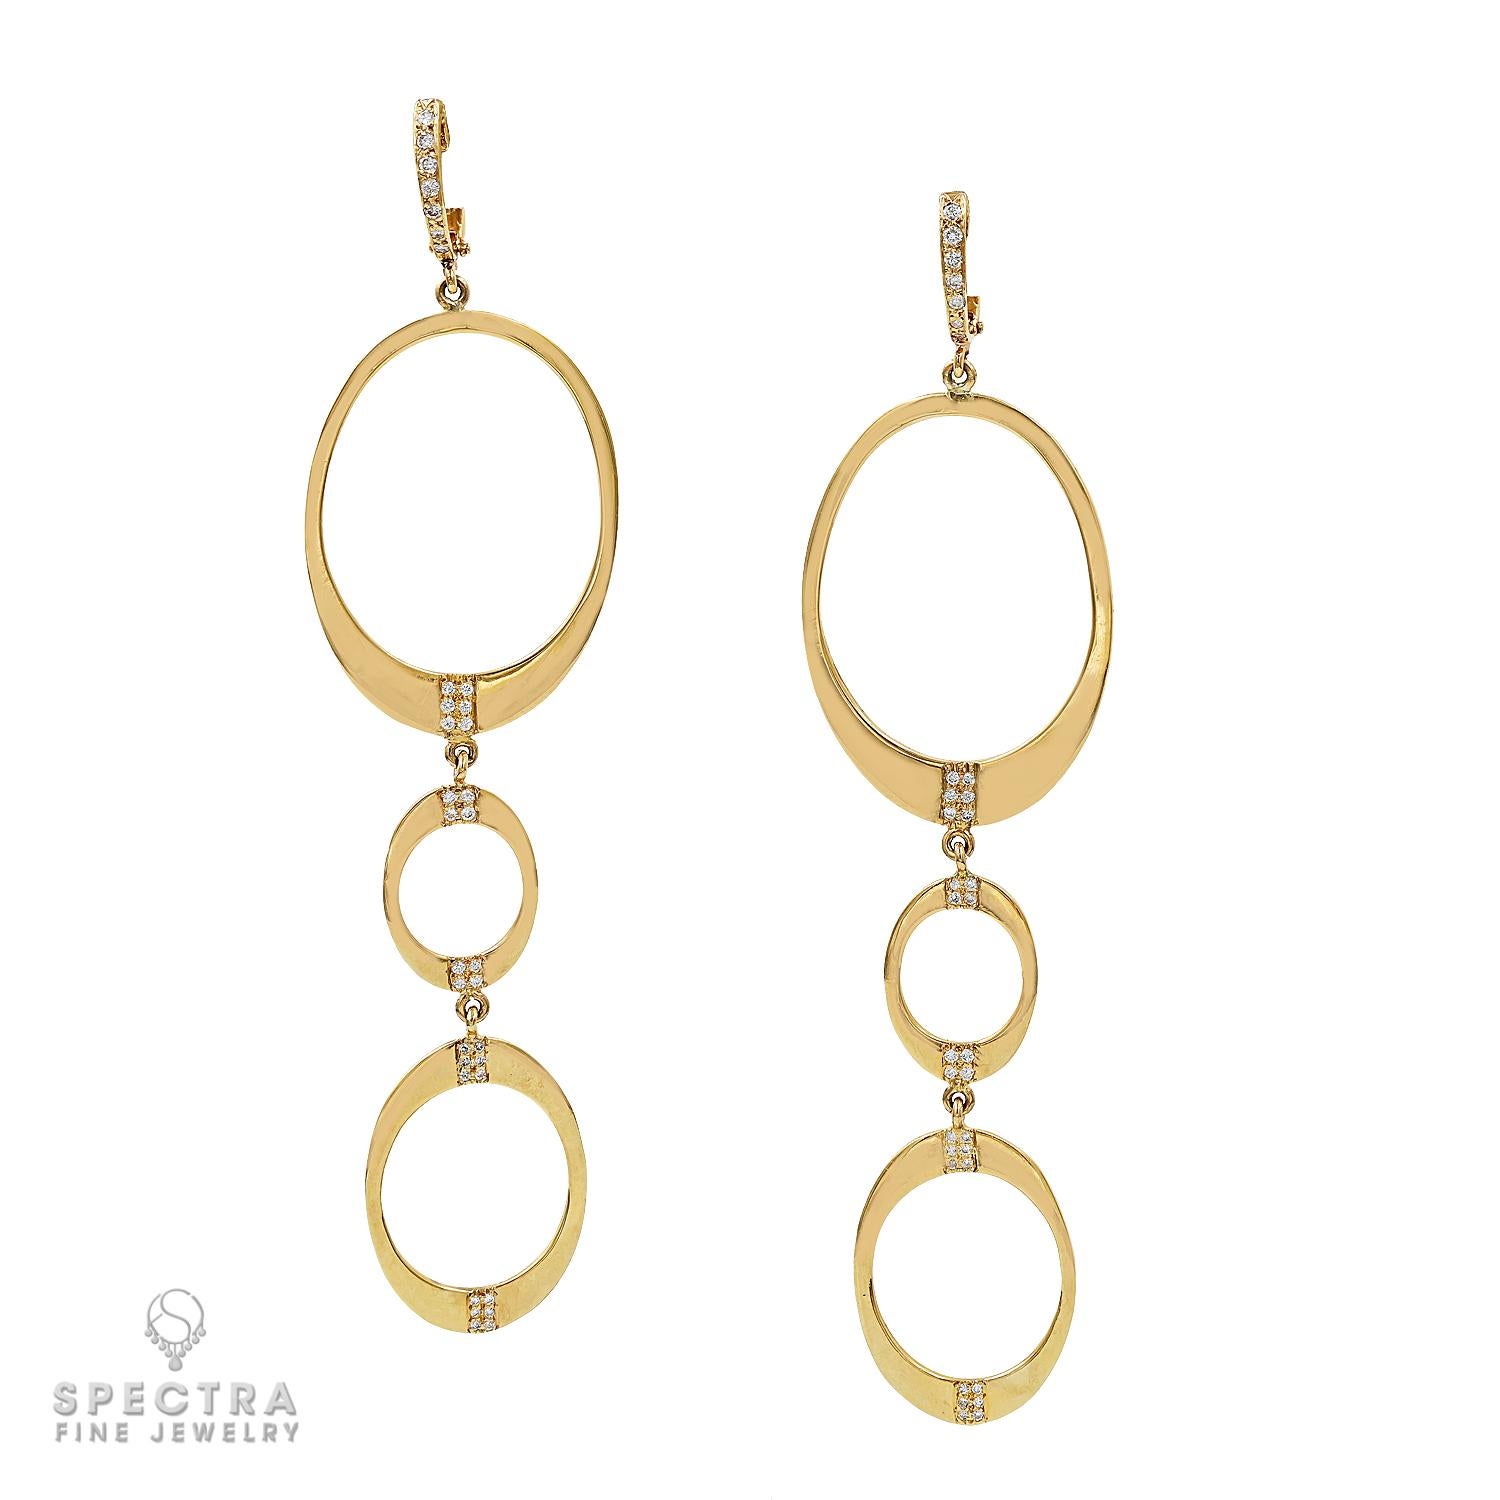 These captivating elongated earrings are meticulously crafted from premium 14k yellow gold, boasting three graceful hoops intricately linked to form a mesmerizing cascade of radiant gold. The largest hoop, measuring approximately 1.5 inches at its